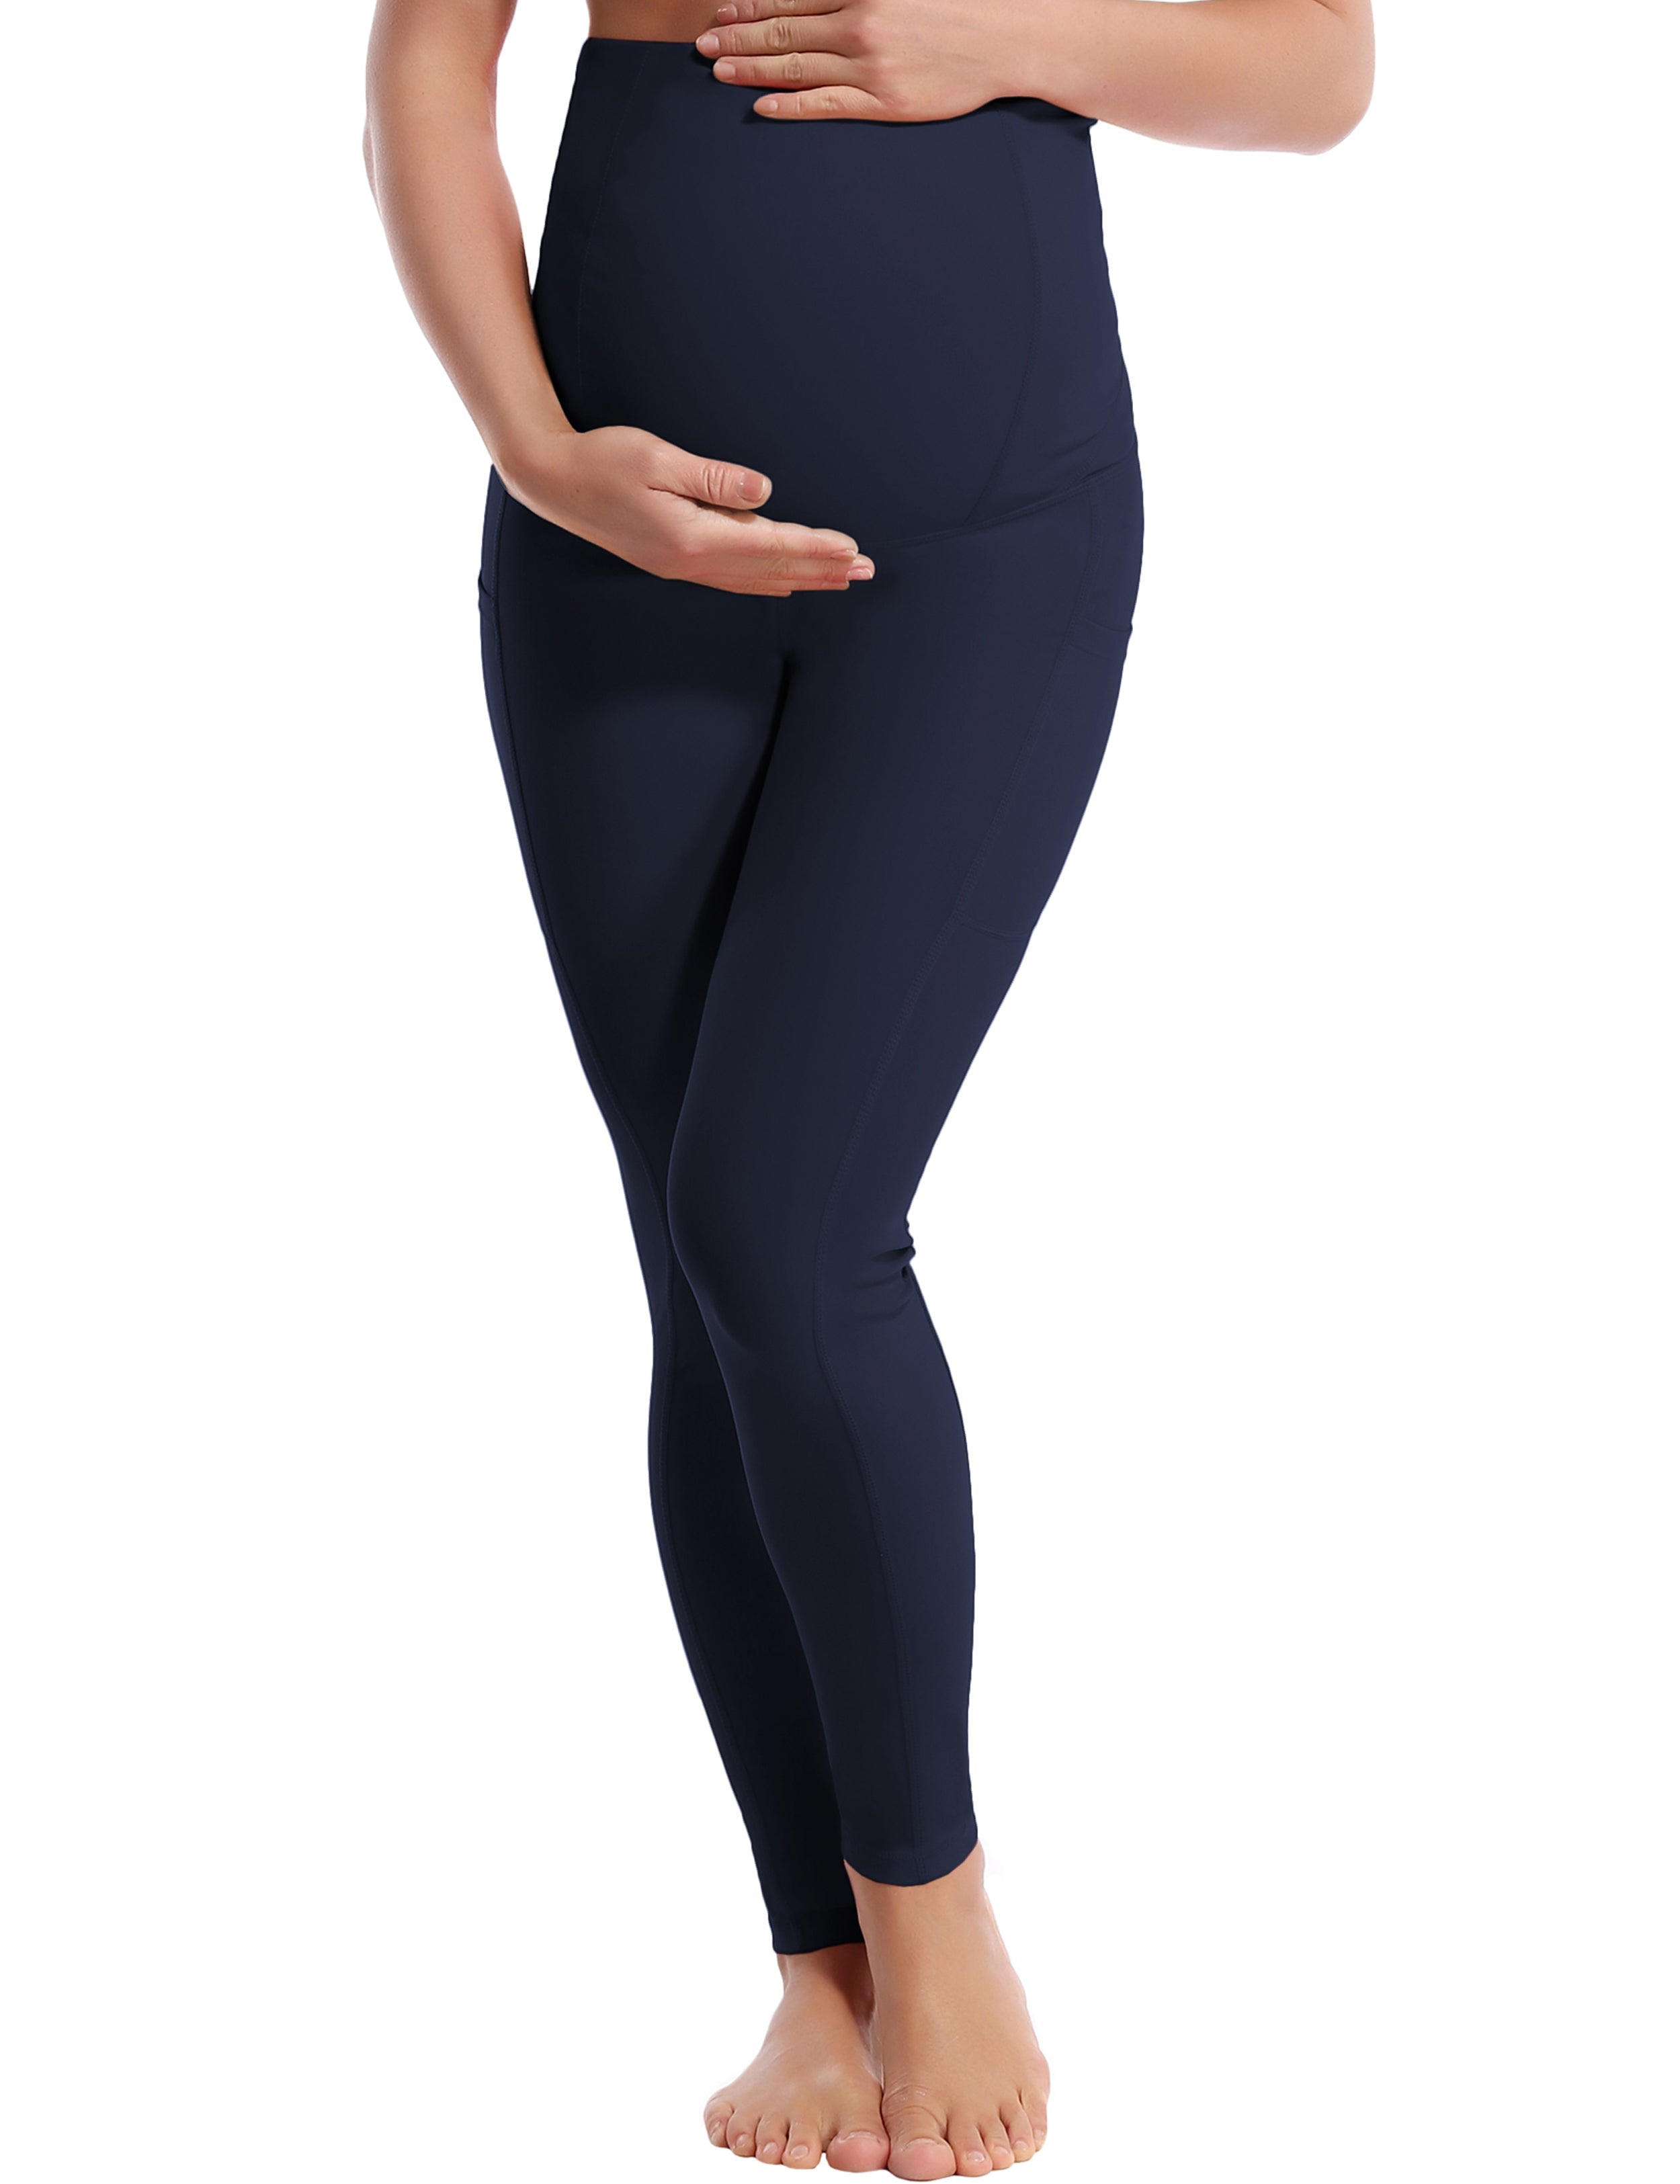 26" Side Pockets Maternity Biking Pants darknavy 87%Nylon/13%Spandex Softest-ever fabric High elasticity 4-way stretch Fabric doesn't attract lint easily No see-through Moisture-wicking Machine wash